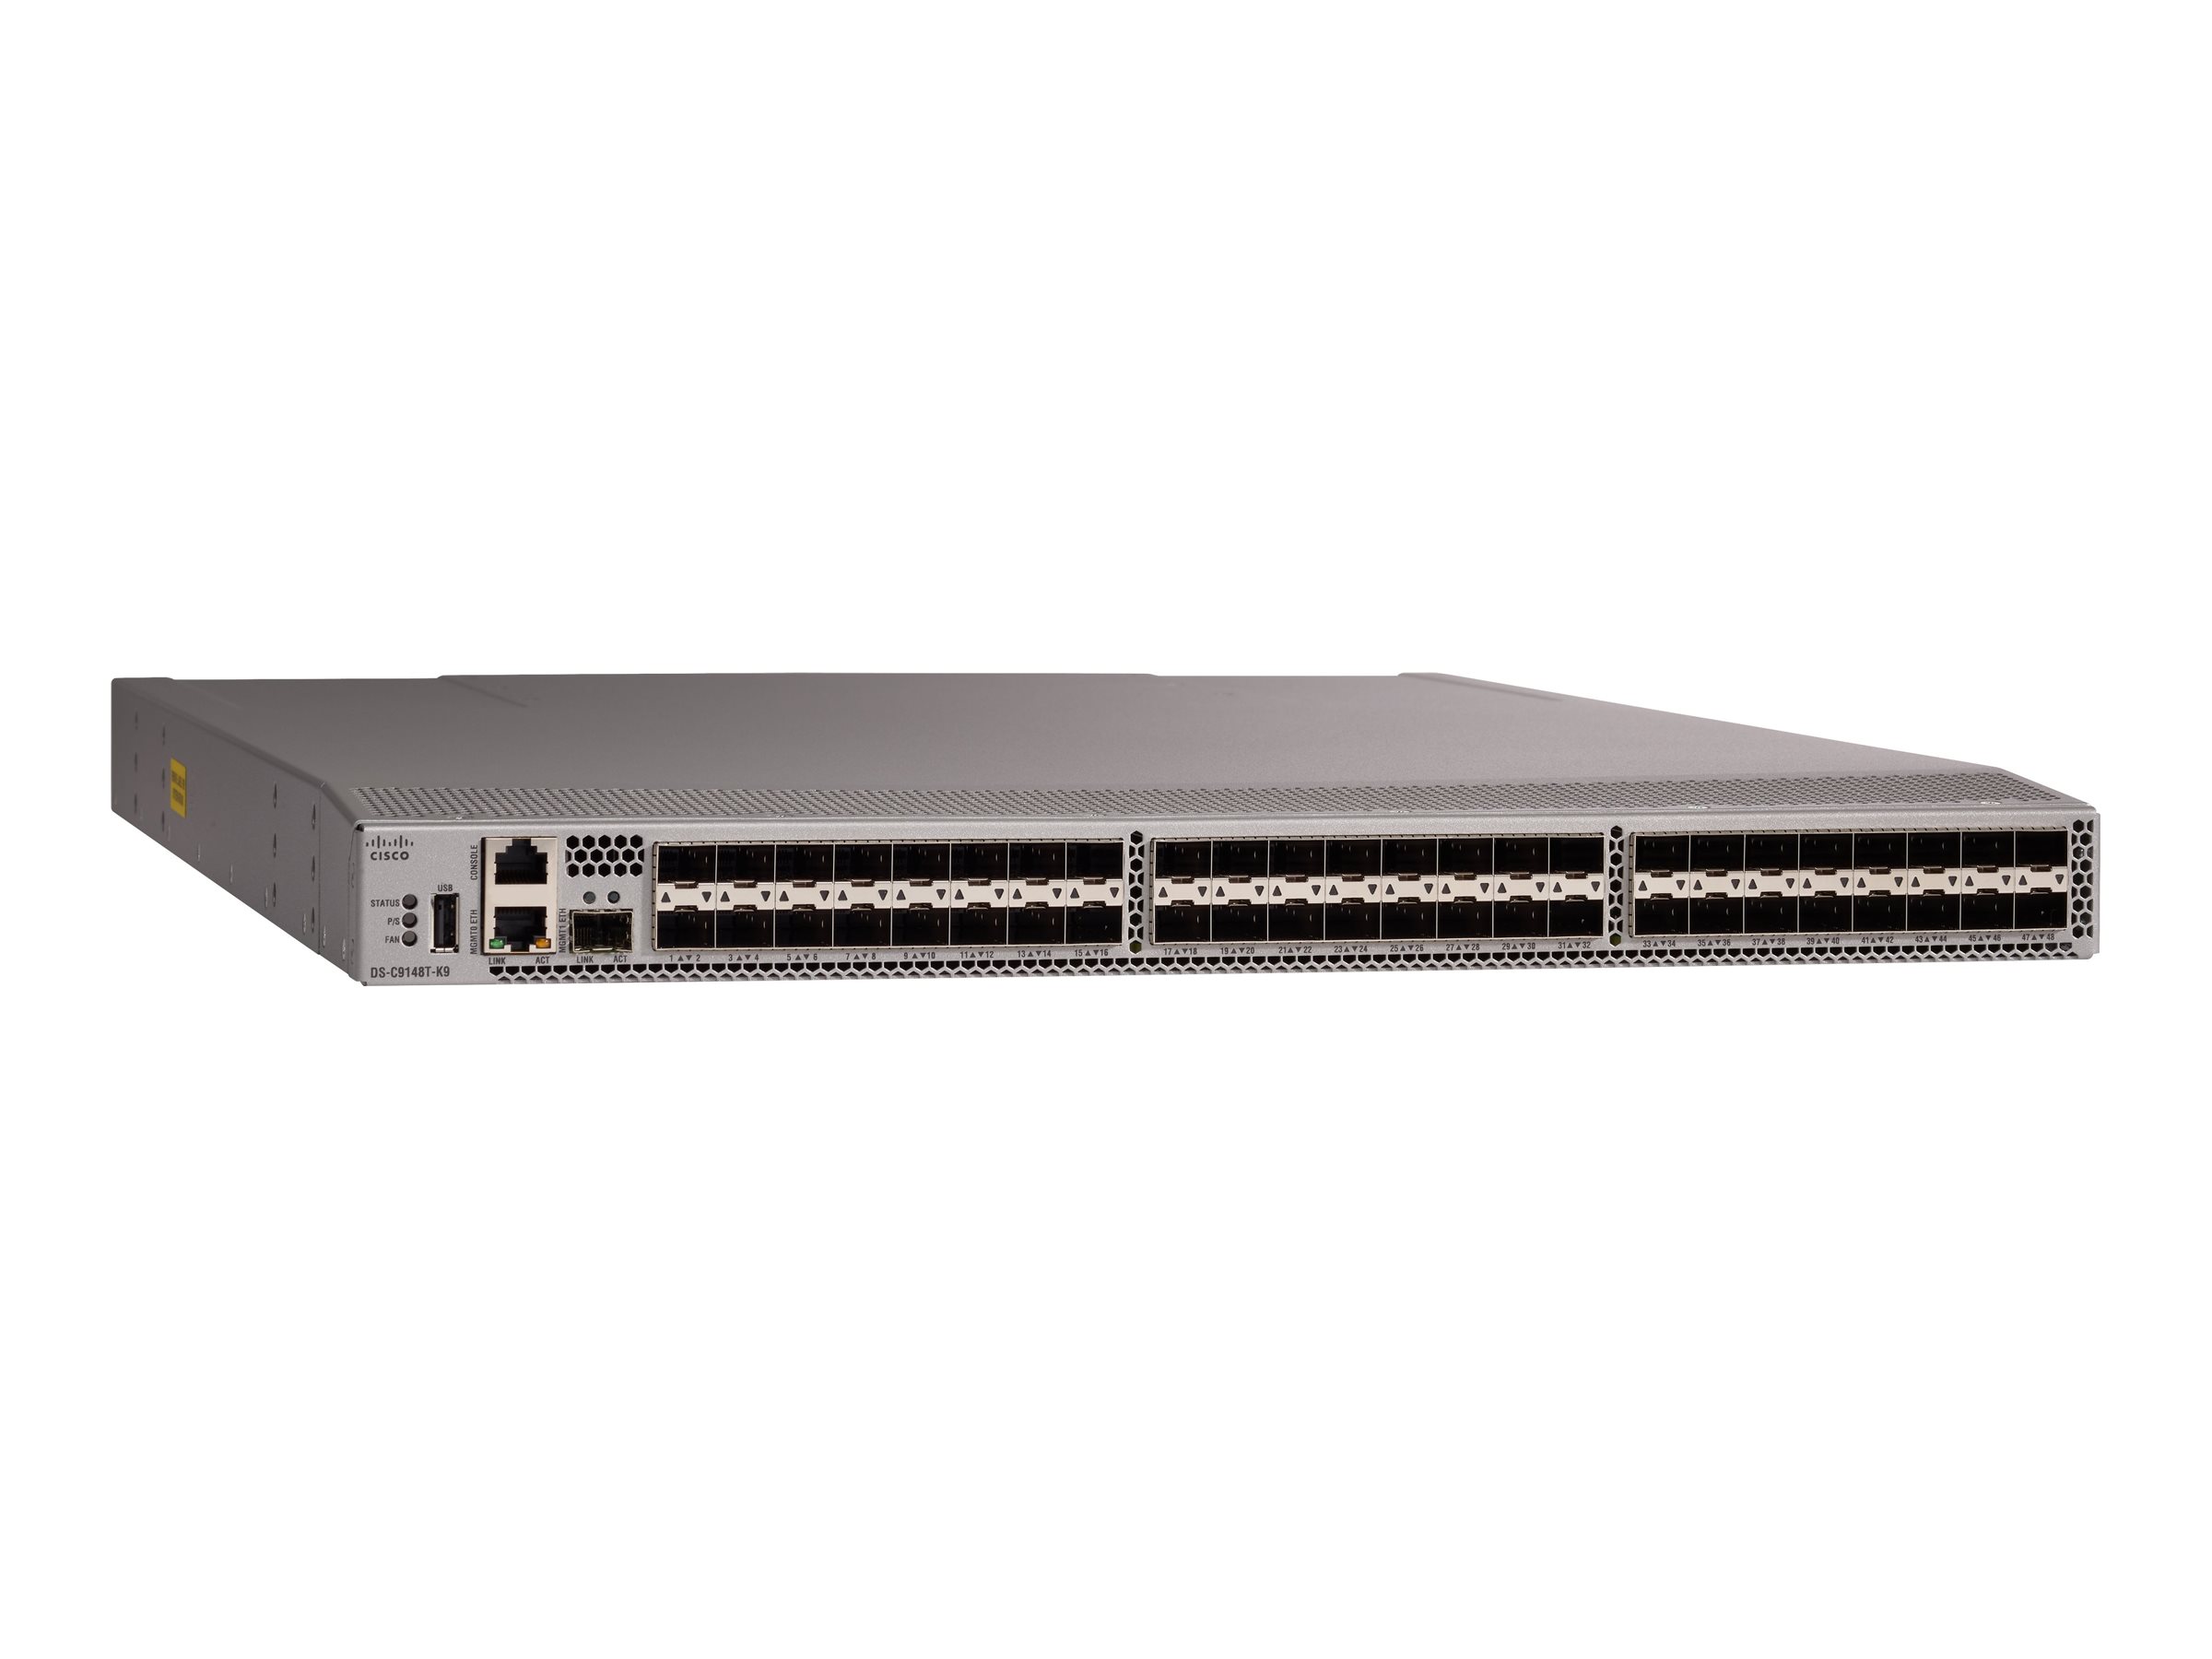 HPE SN6620C 32Gb 48/48 32Gb Short Wave SFP+ Fibre Channel v2 Switch - C-Series - Switch - managed - 48 x 32Gb Fibre Channel SFP+